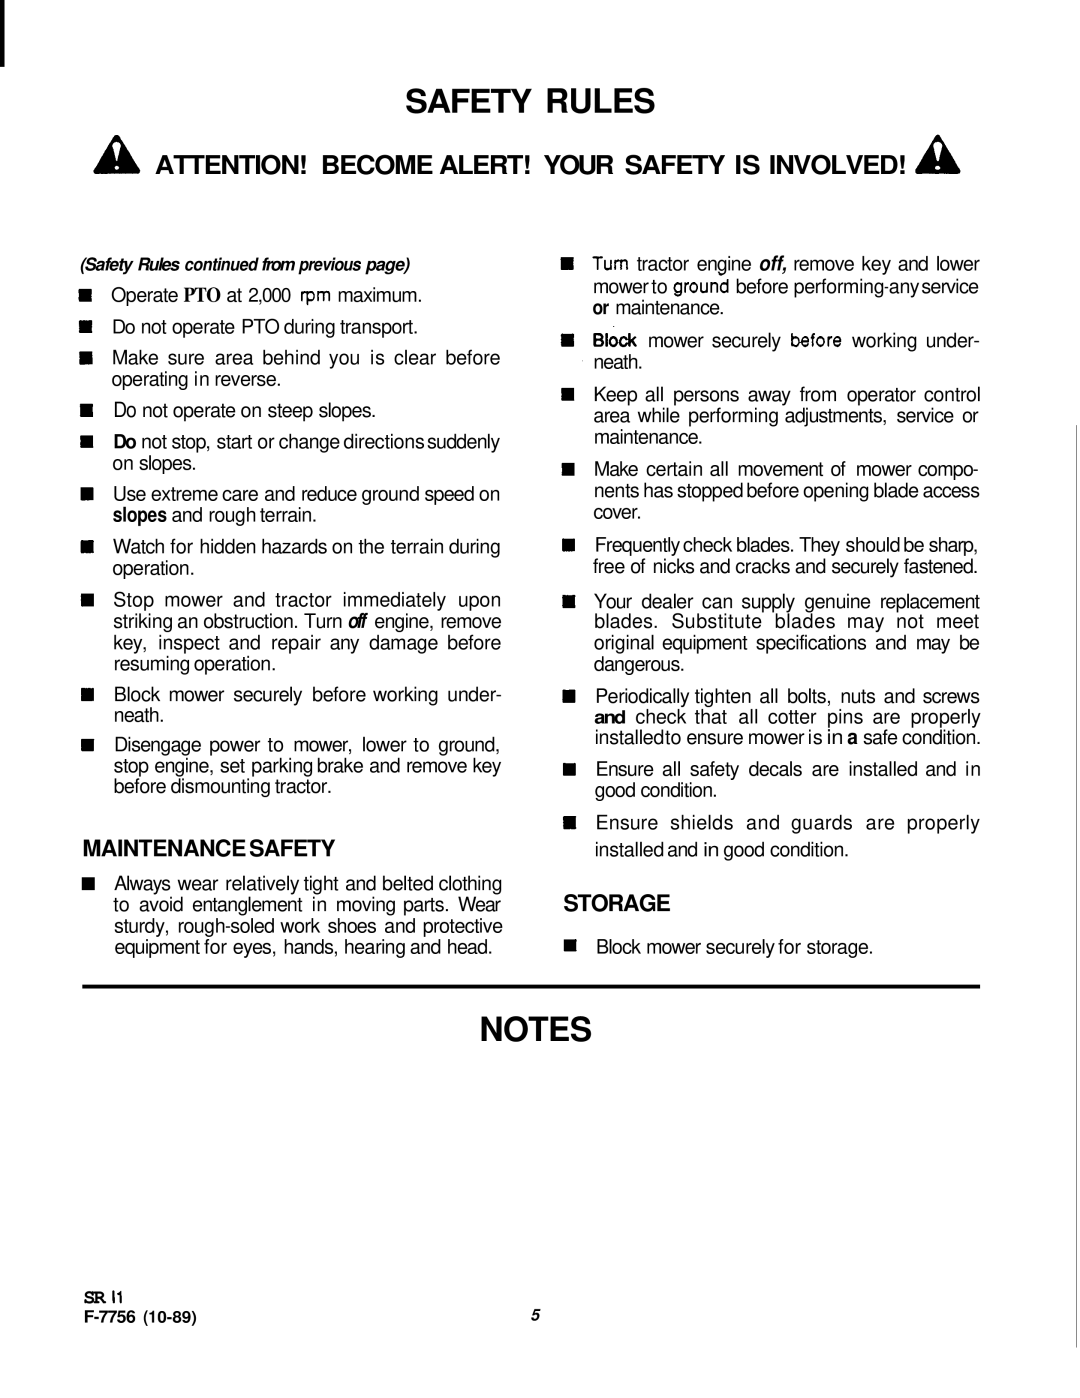 Honda Power Equipment RM752A manual Safety Rules, A Attention! Become Alert! Your Safety Is Involved! A, Maintenance Safety 